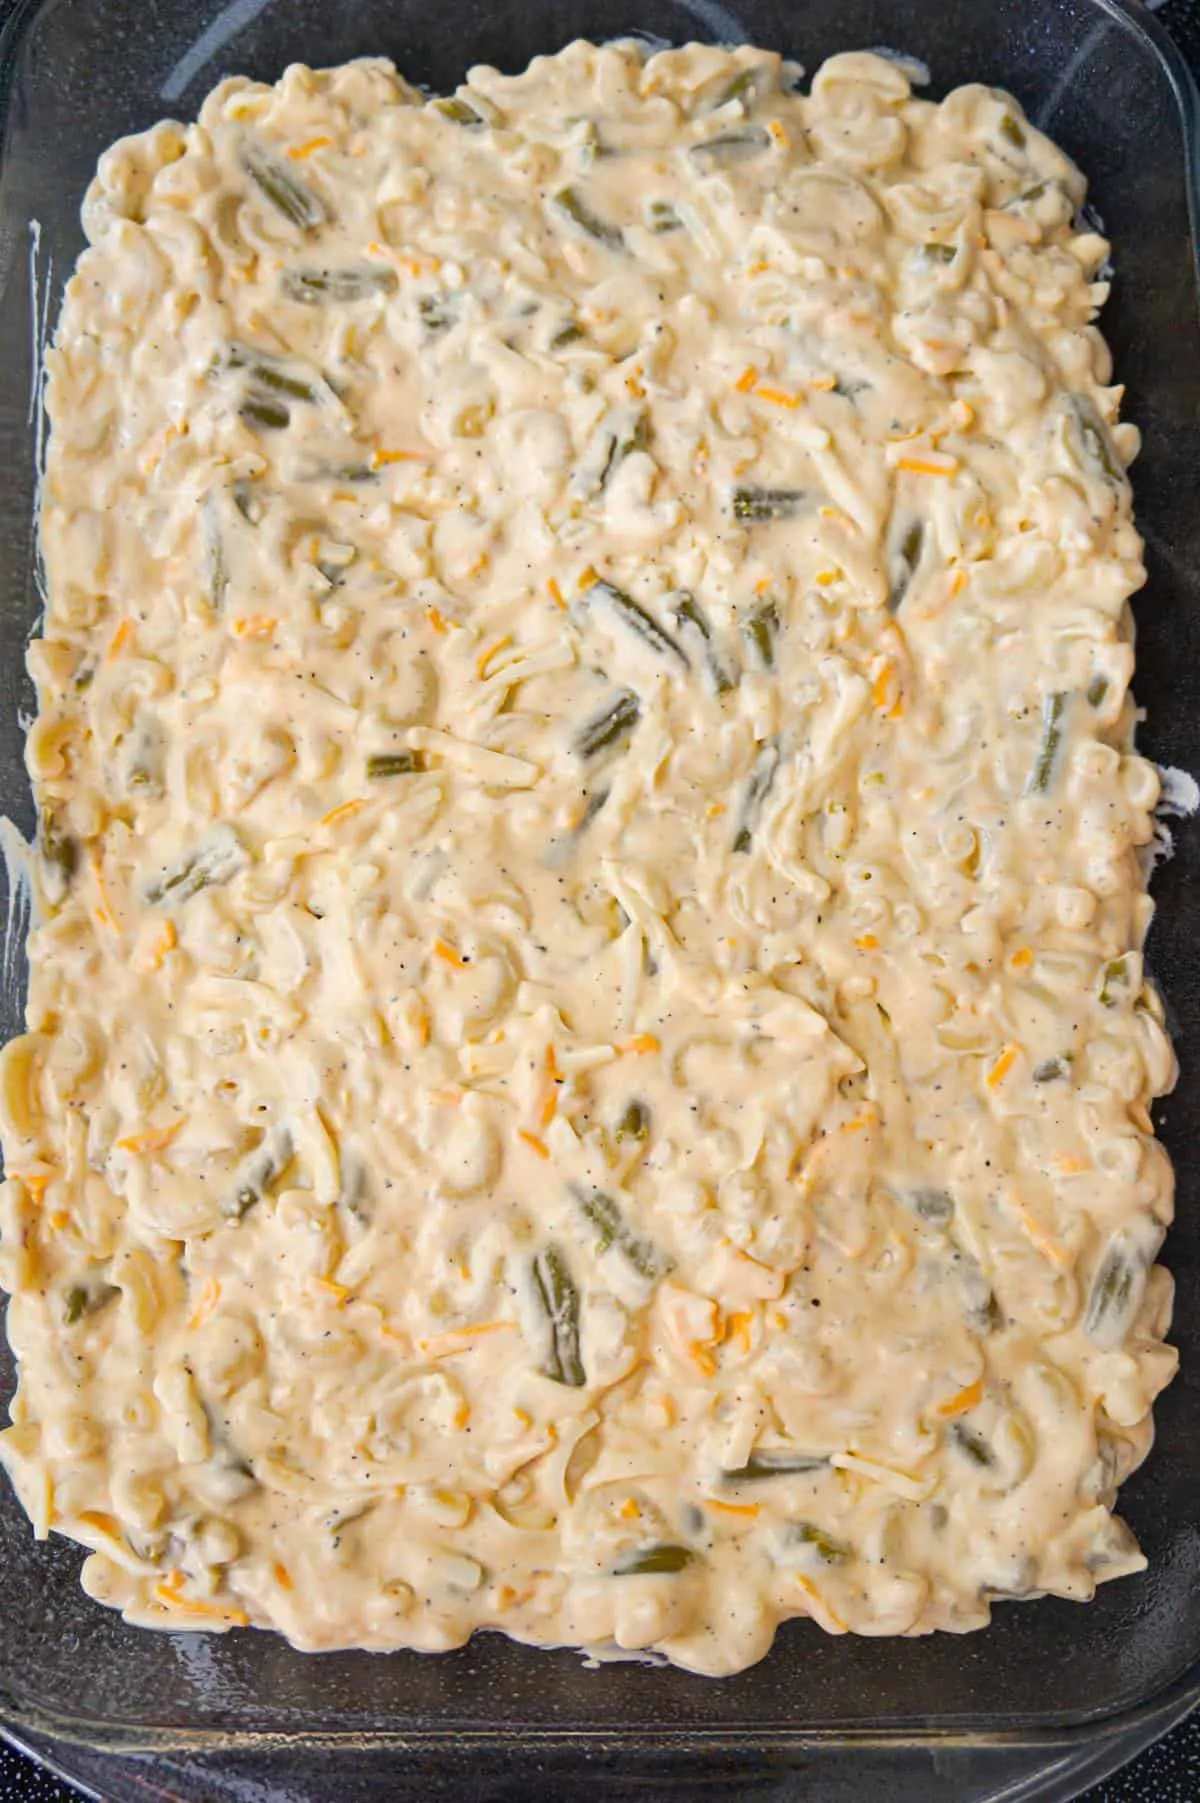 creamy macaroni and cheese mixture with green beans in a baking dish